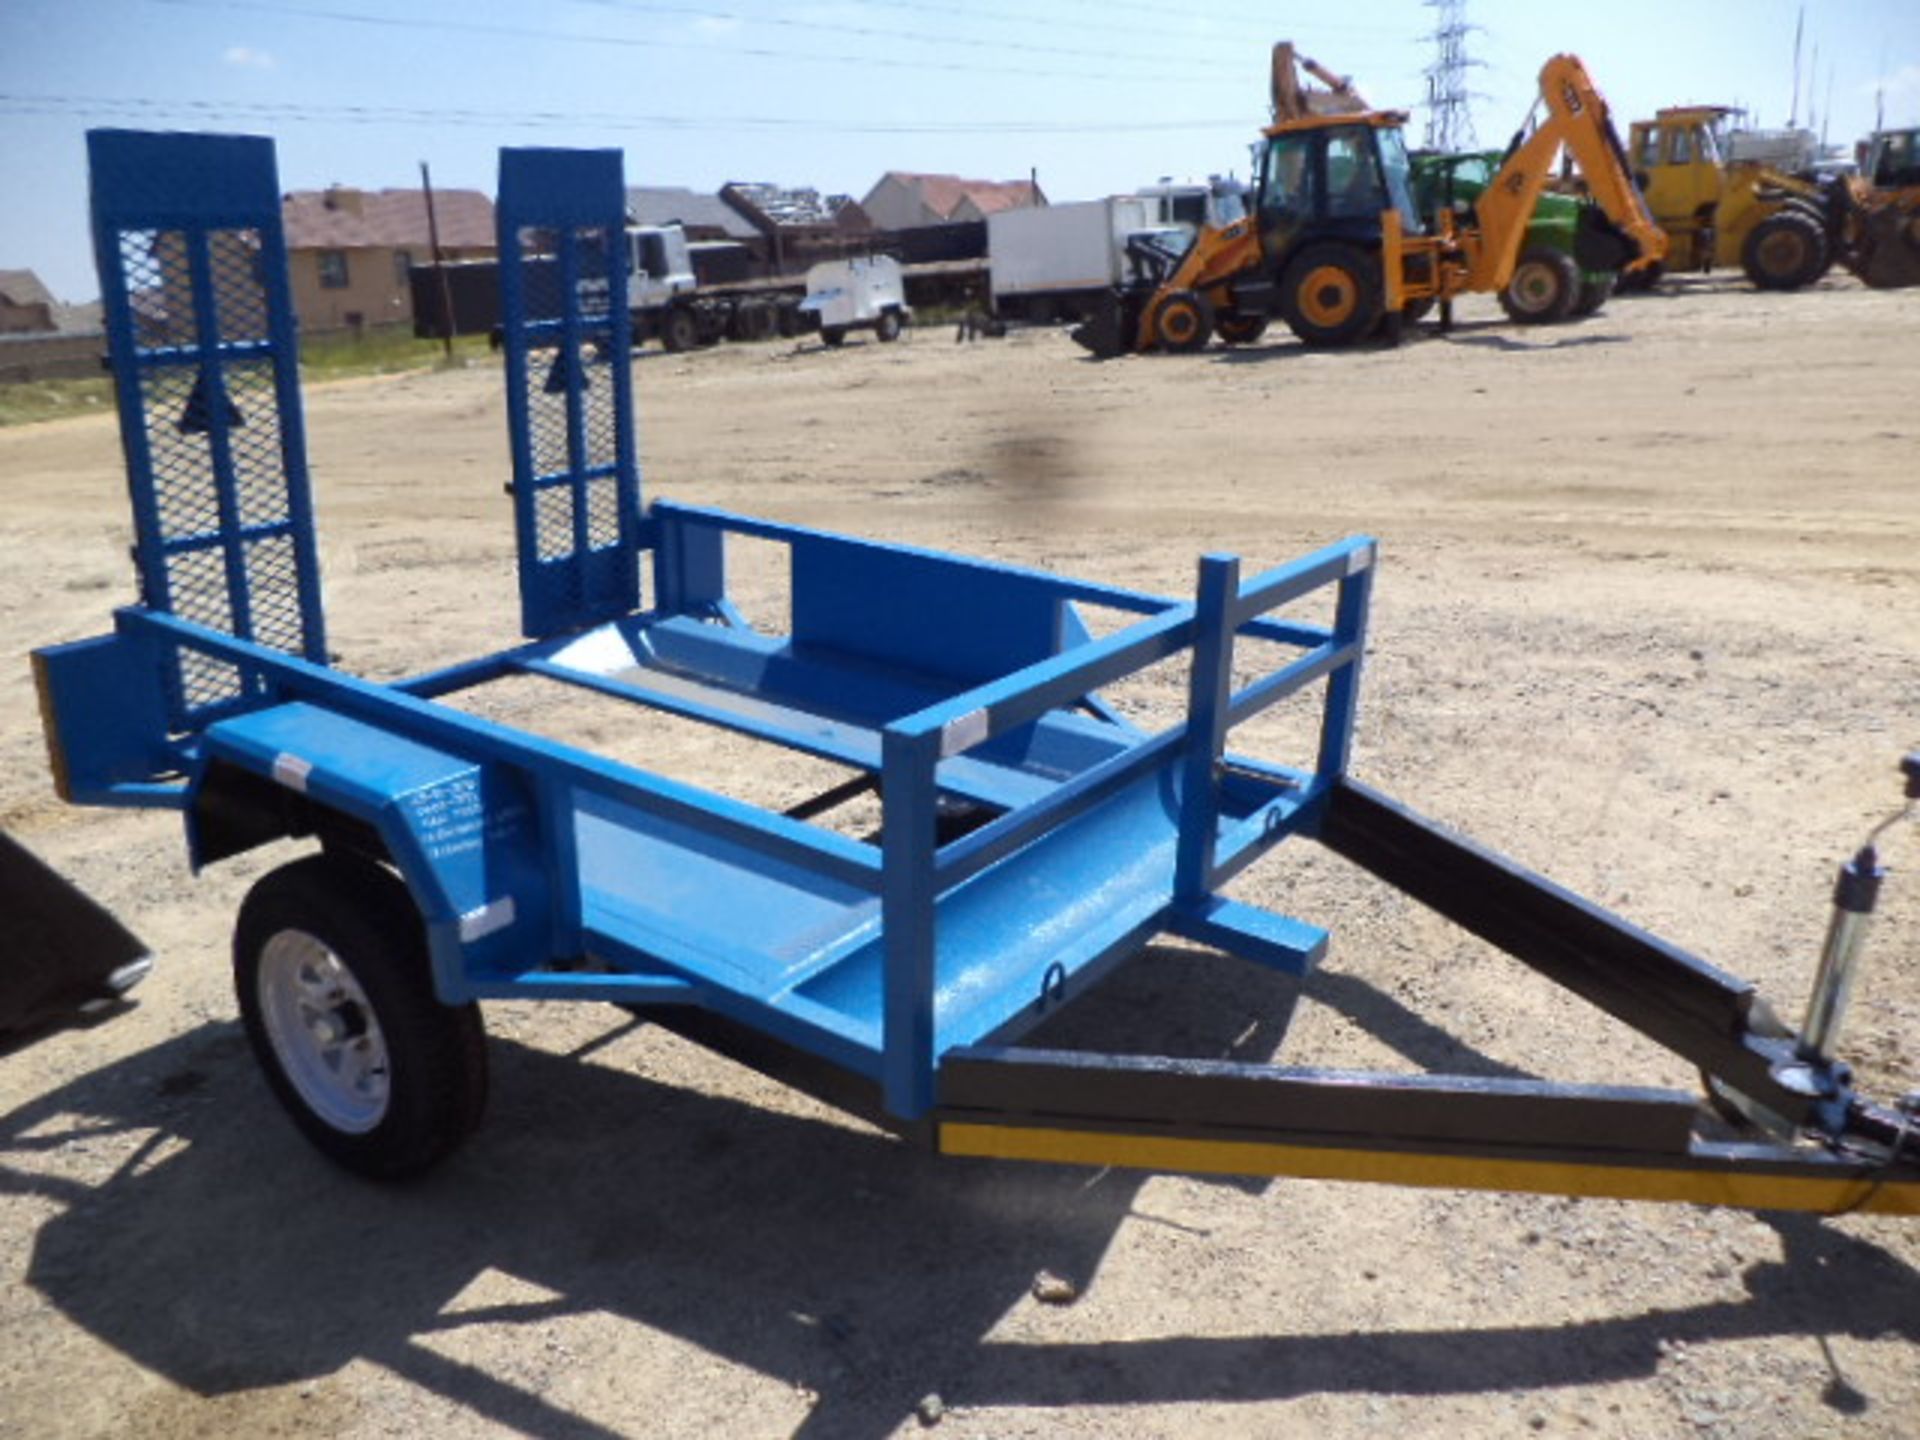 NEW Single Axle Blue Trailer With Ramps (Vin No: AA9B175UBEBTT1323 )(un-registered) - Image 2 of 4